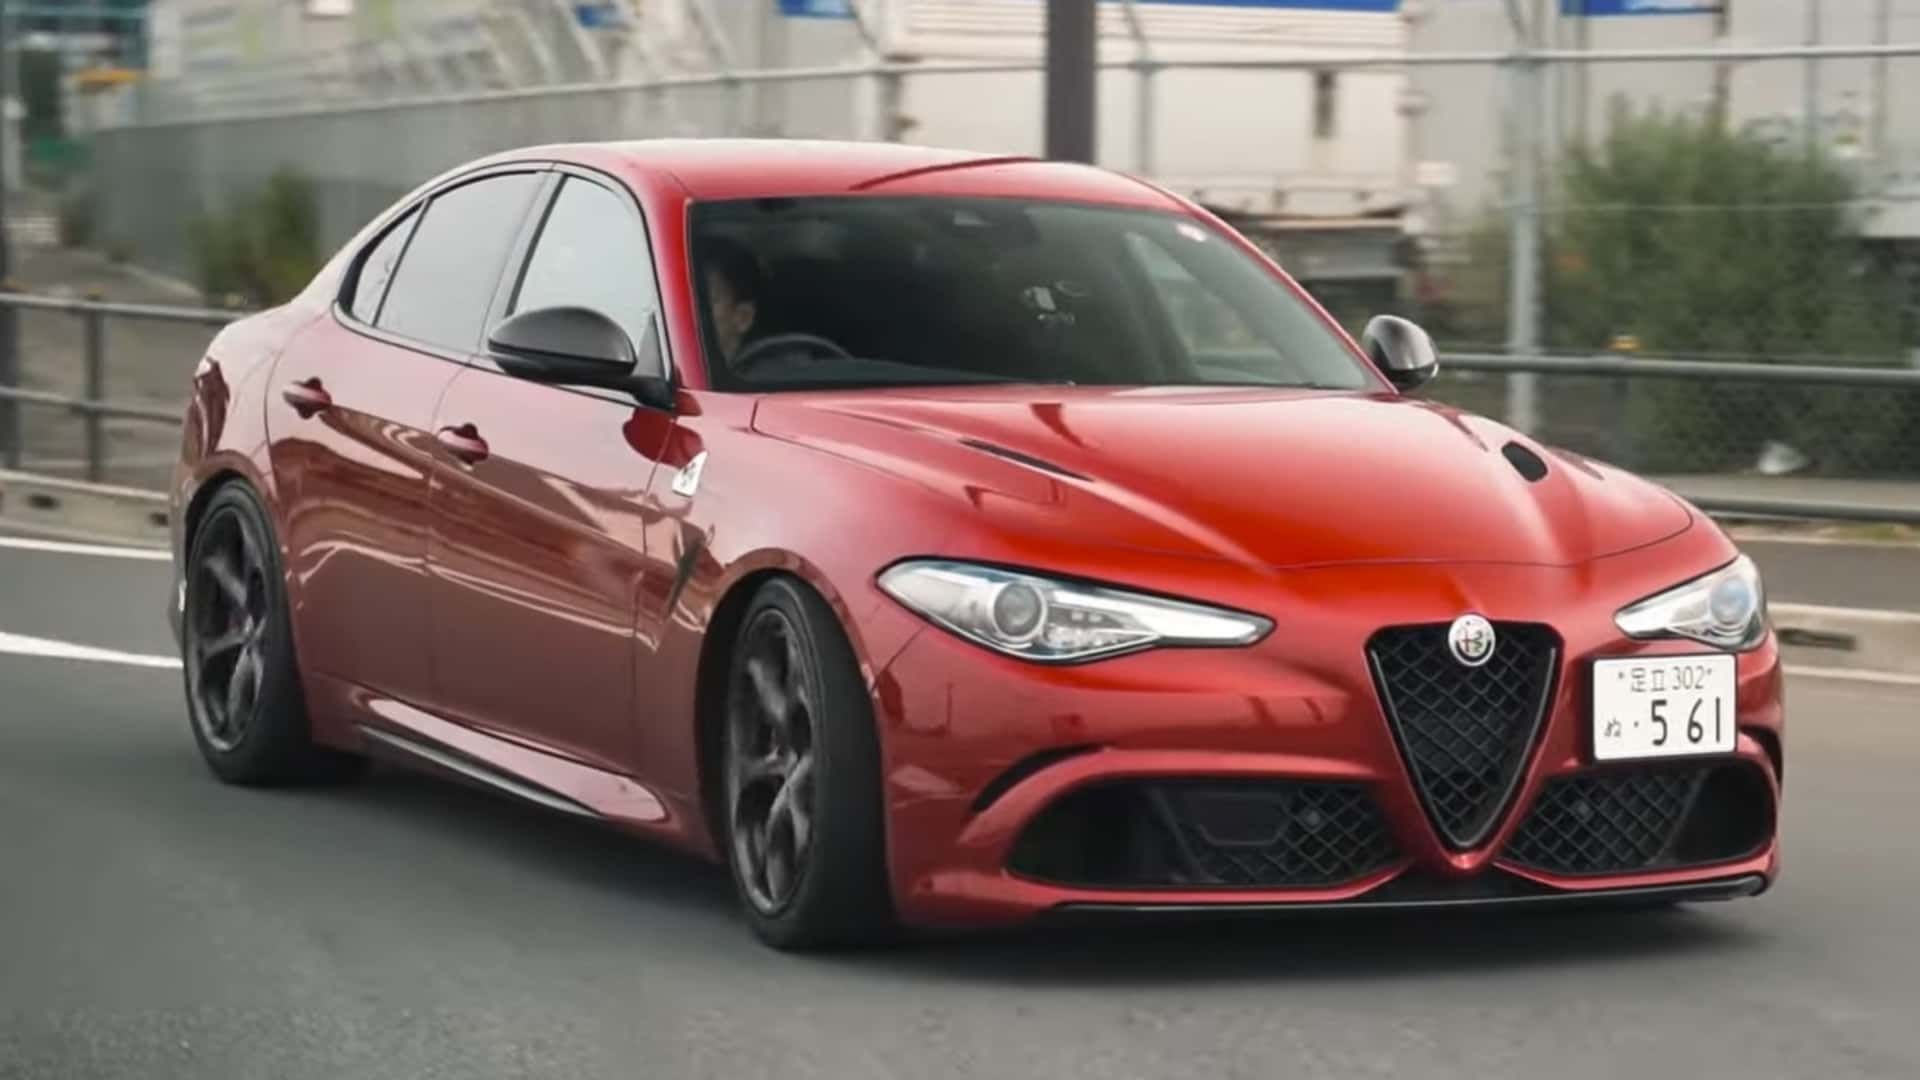 Alfa Romeo 33 Stradale Debuts With 620 HP And Even More Potent EV Version